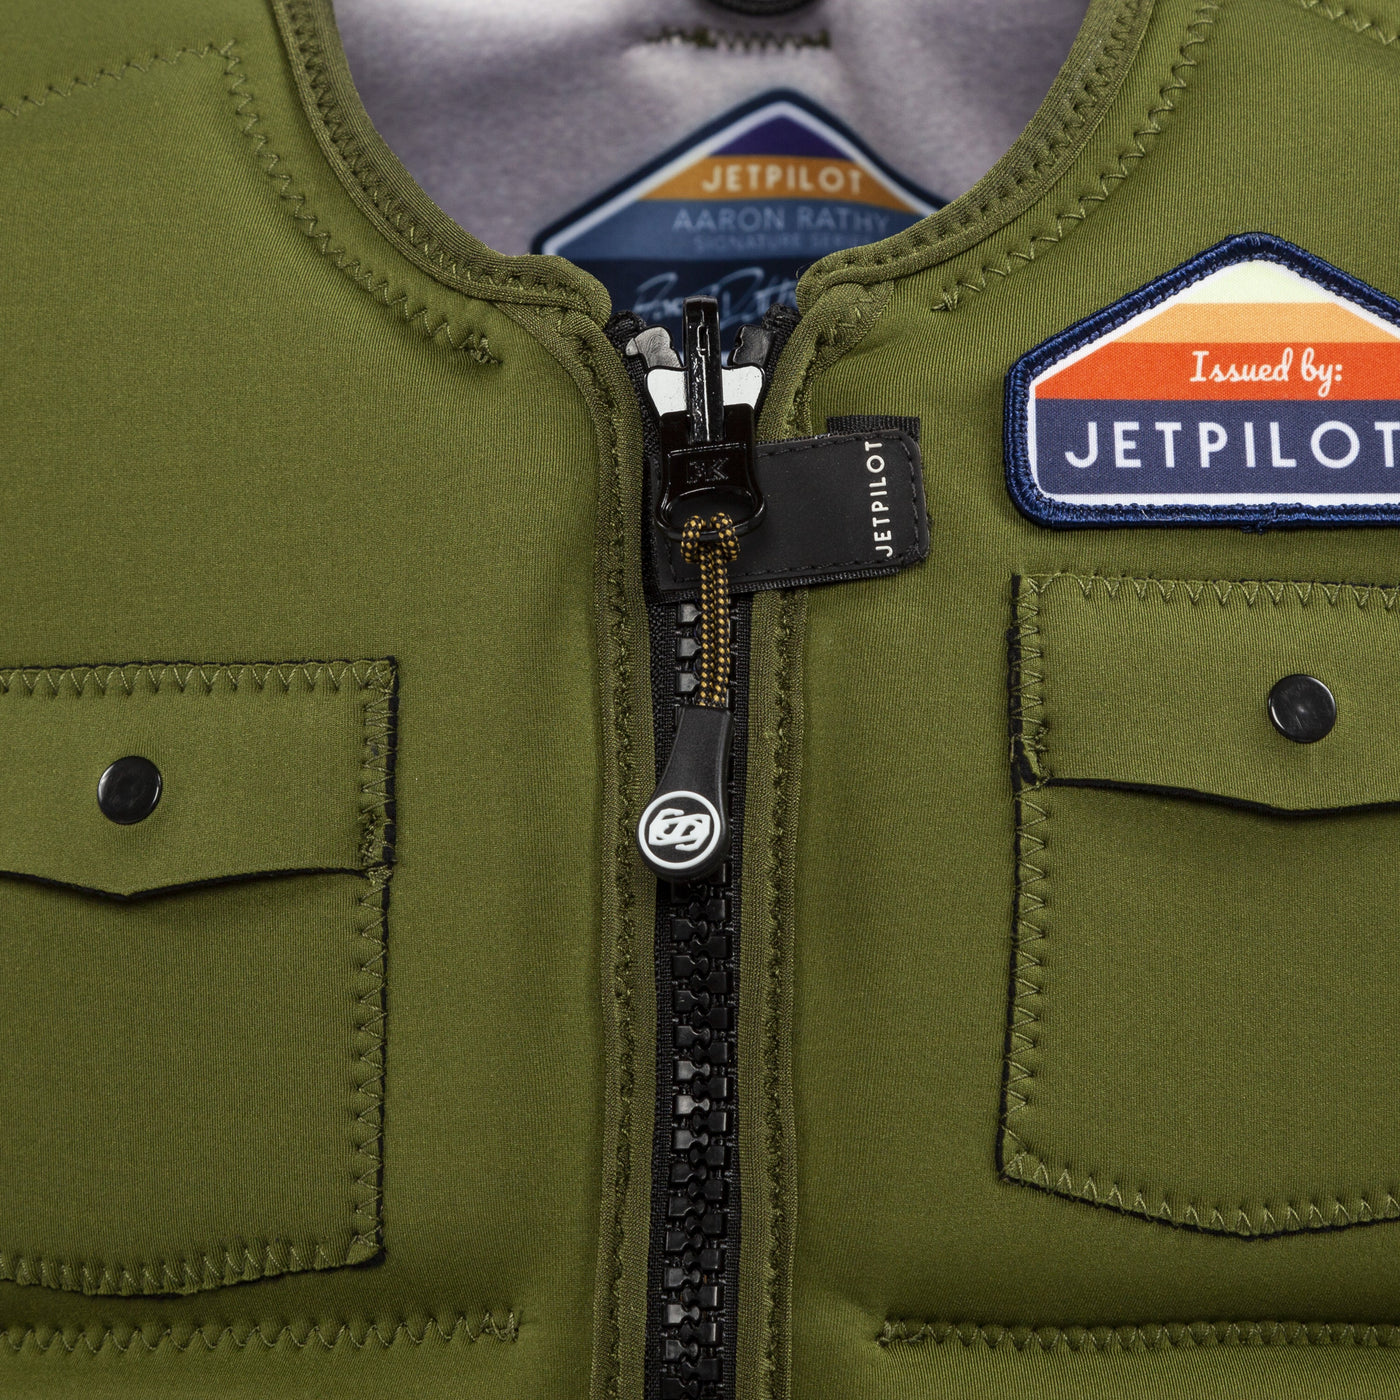 Closeup view showing zipper and patch of the Aaron Rathy of the Jetpilot's Aaron Rathy Signature Comp Vest Moss colorway.